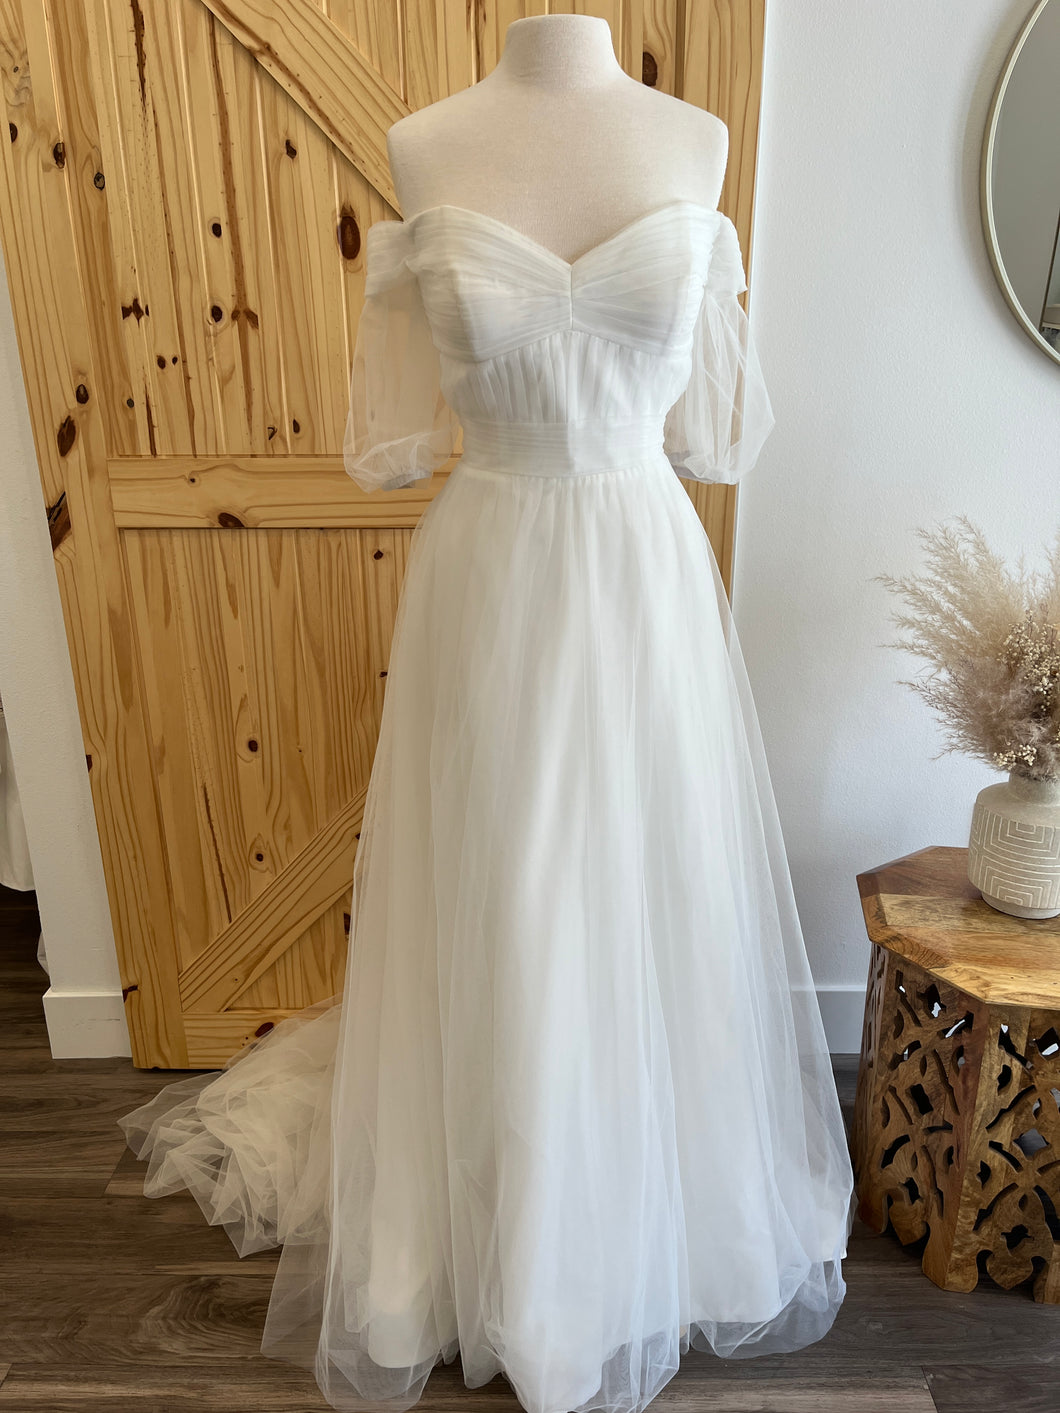 SAMPLE SALE: Evie Young, Sierra Gown